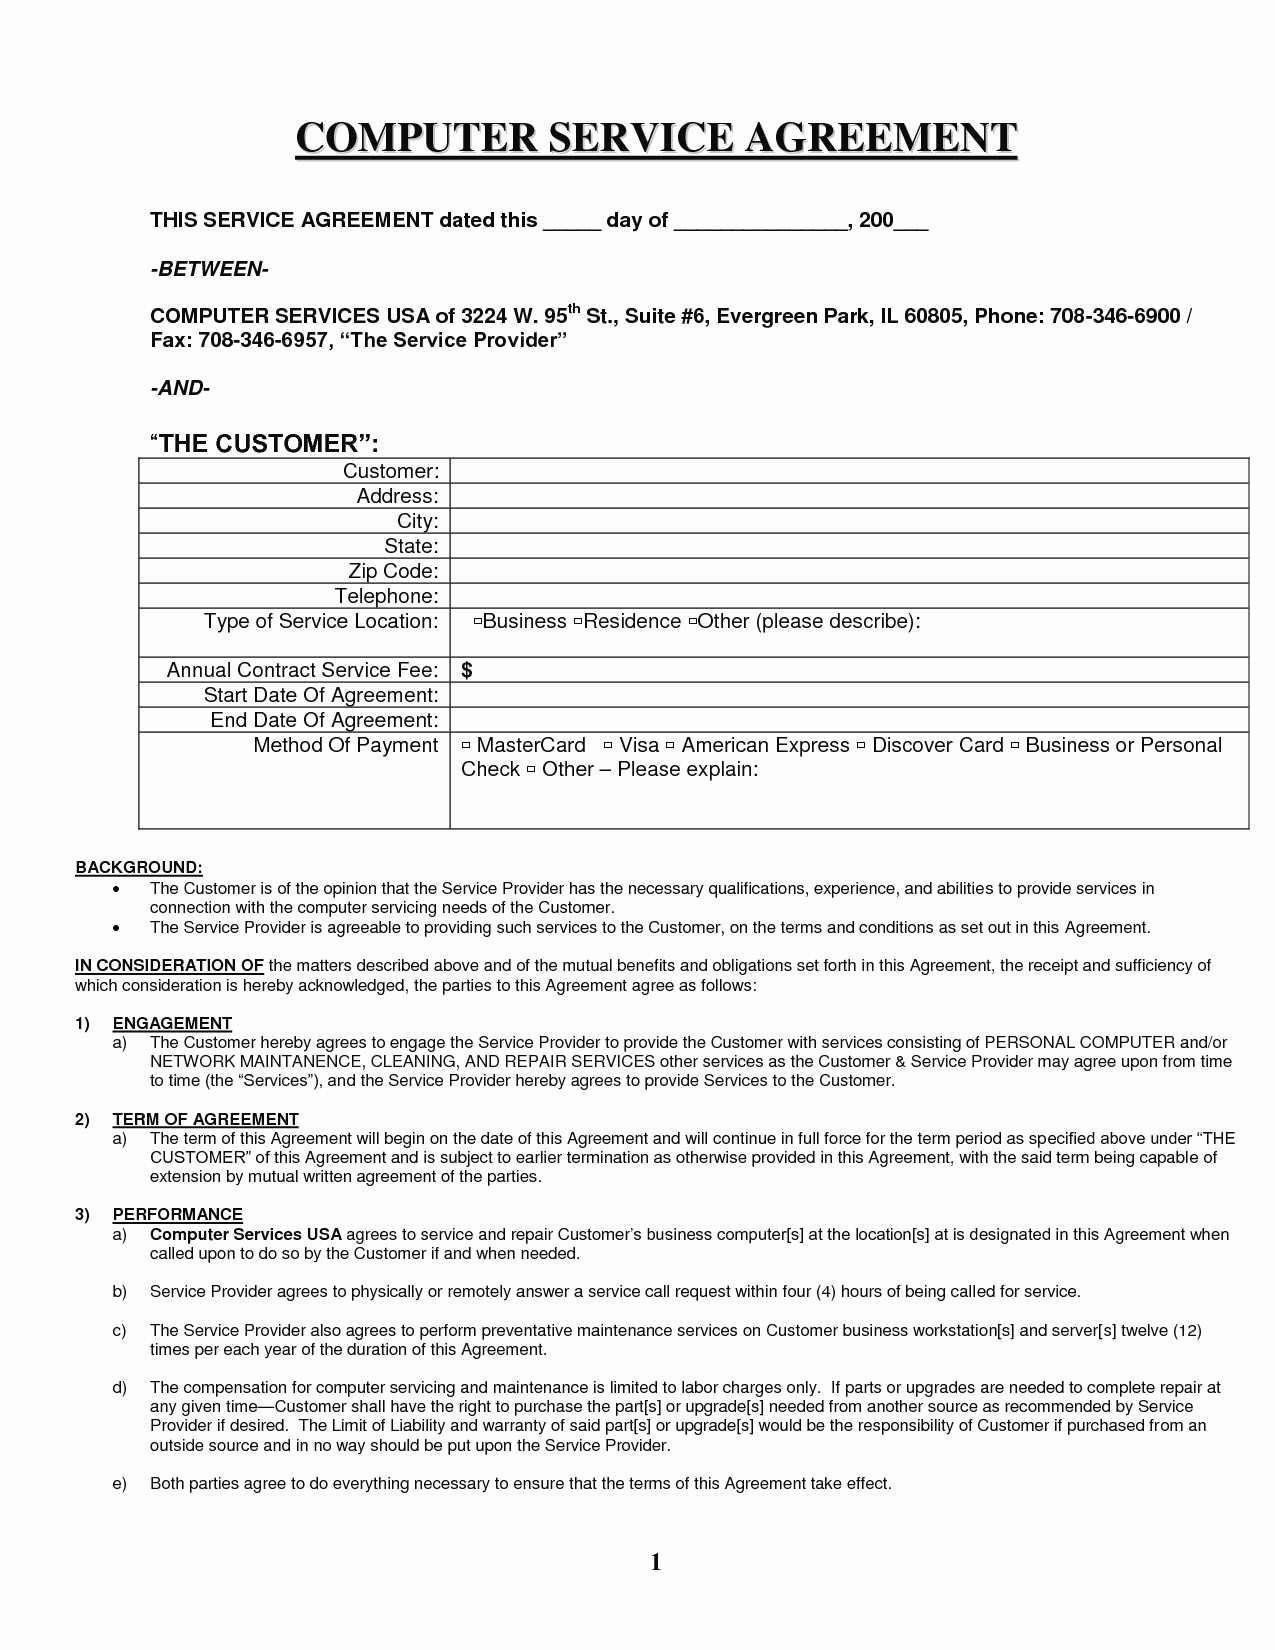 Computer Service Contract Sample New Document Template Puter